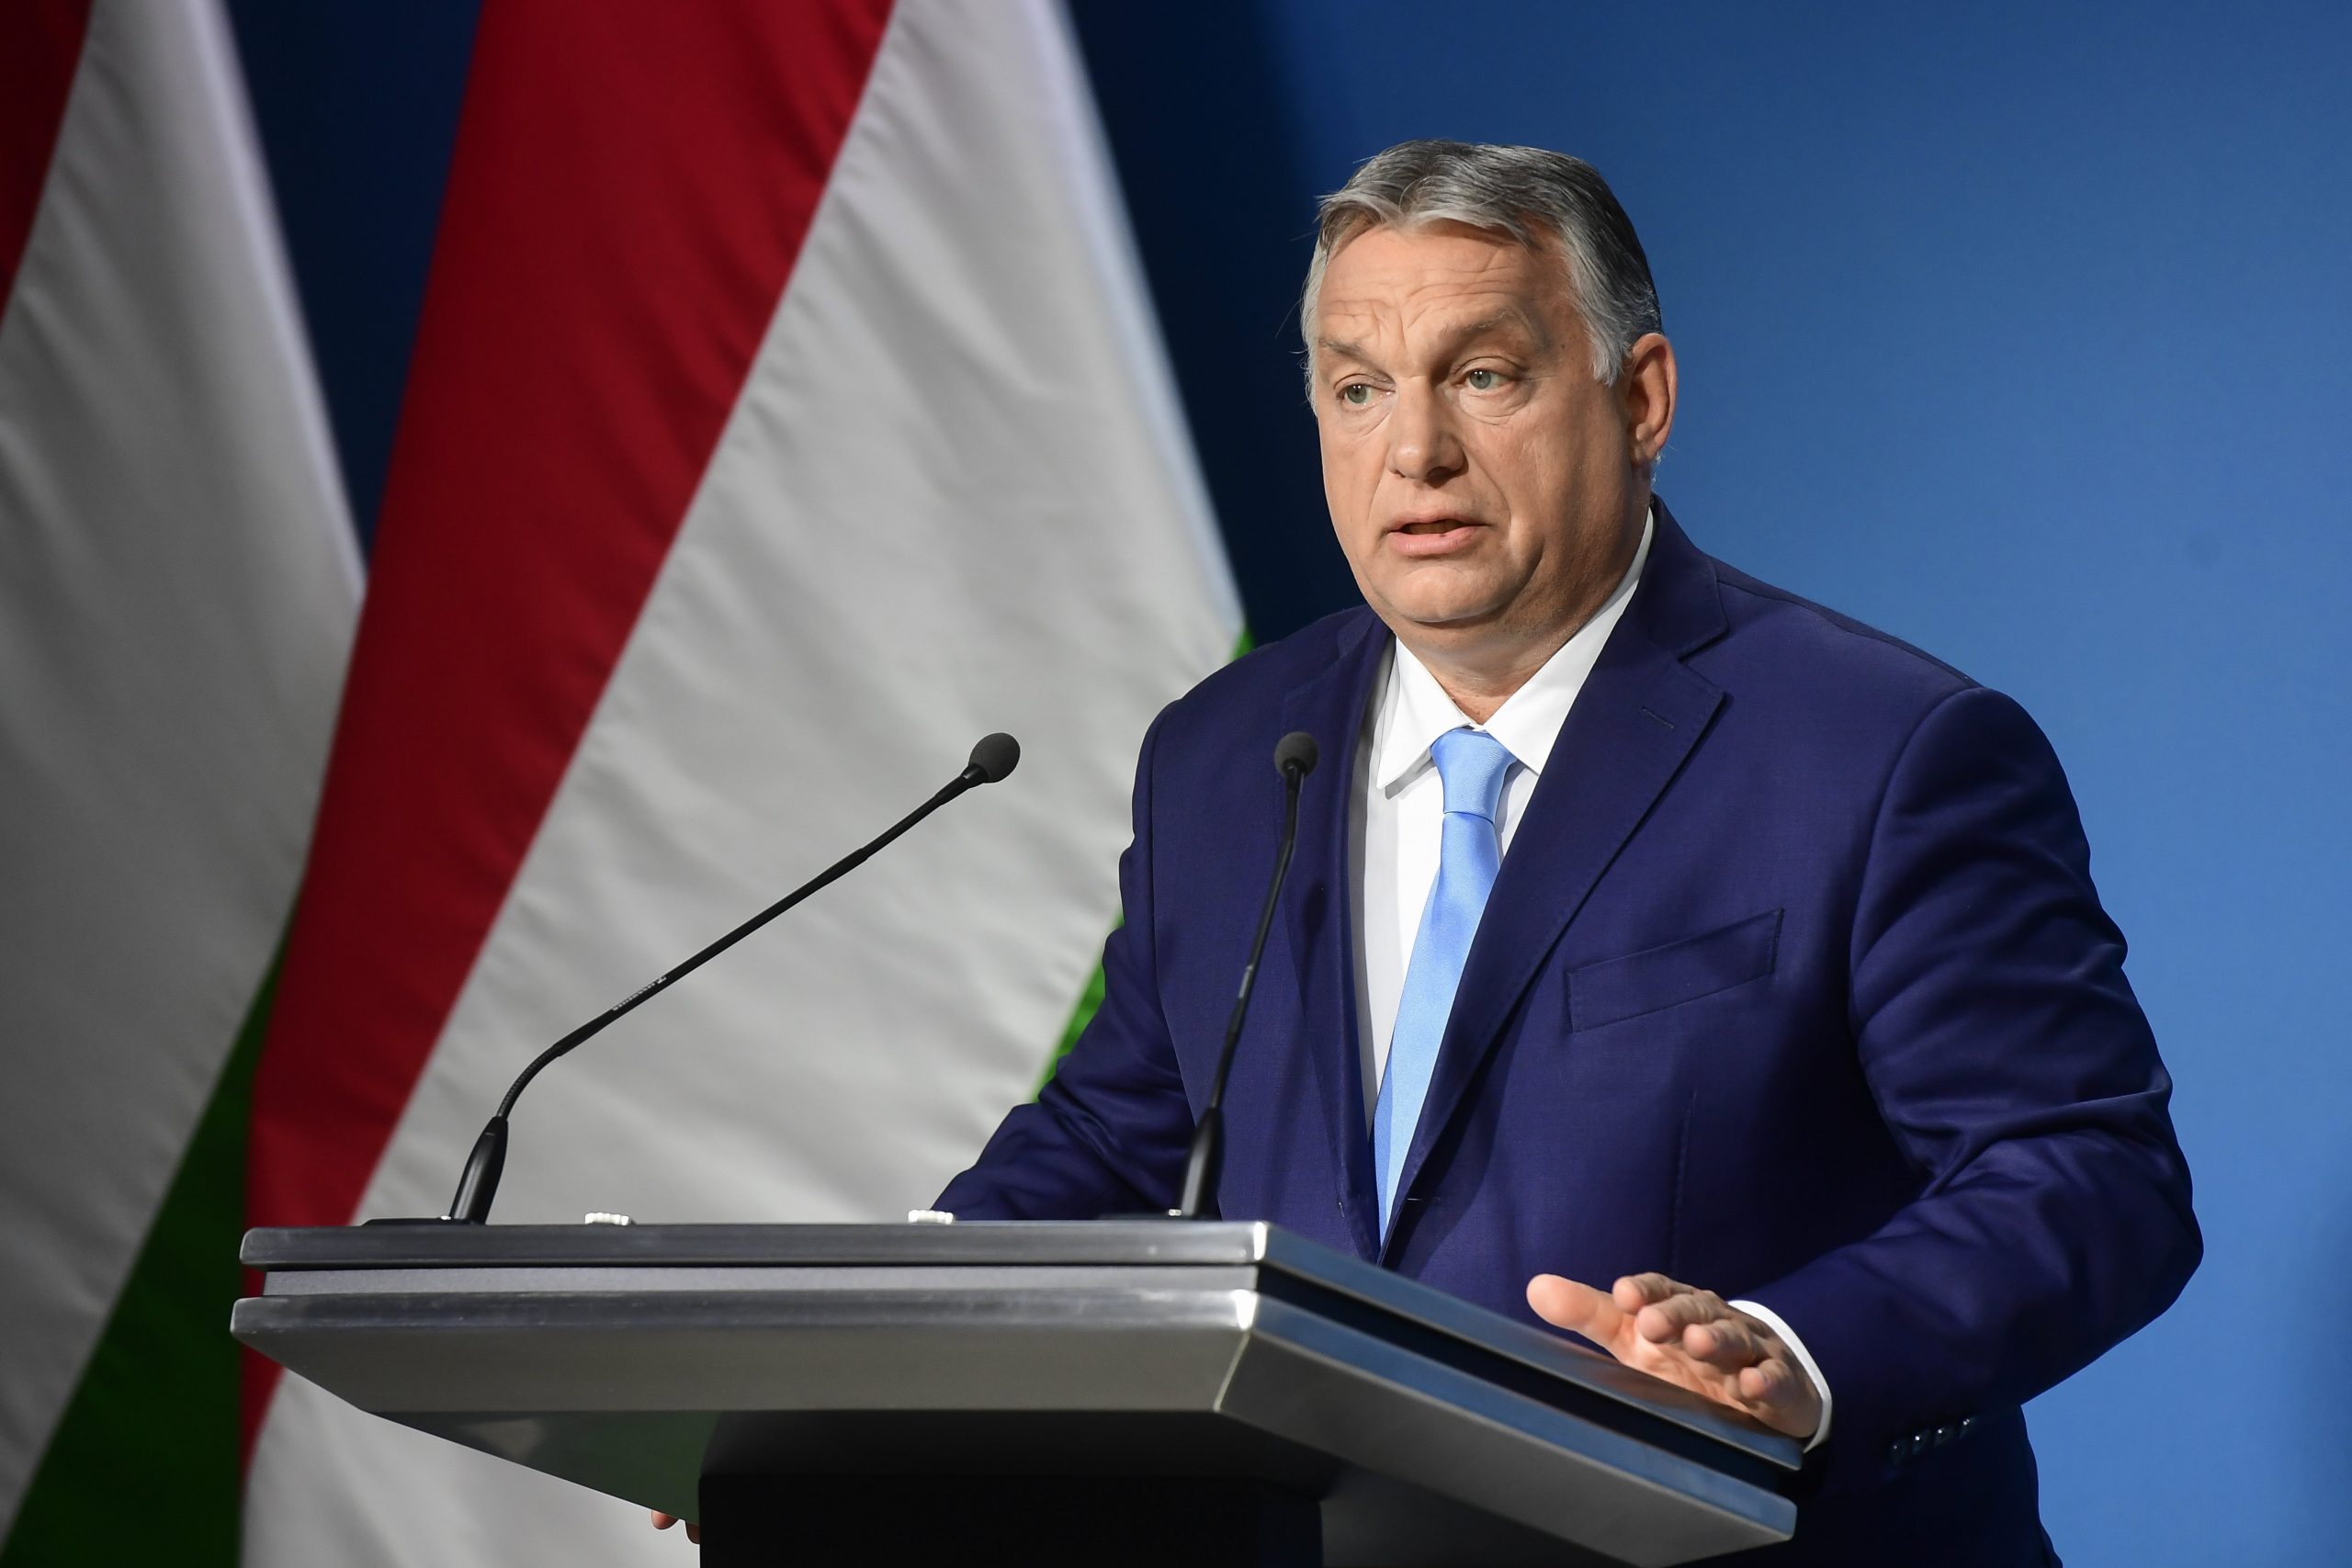 Orbán: New Law Banning 'Promotion of Homosexuality' Not Homophobic